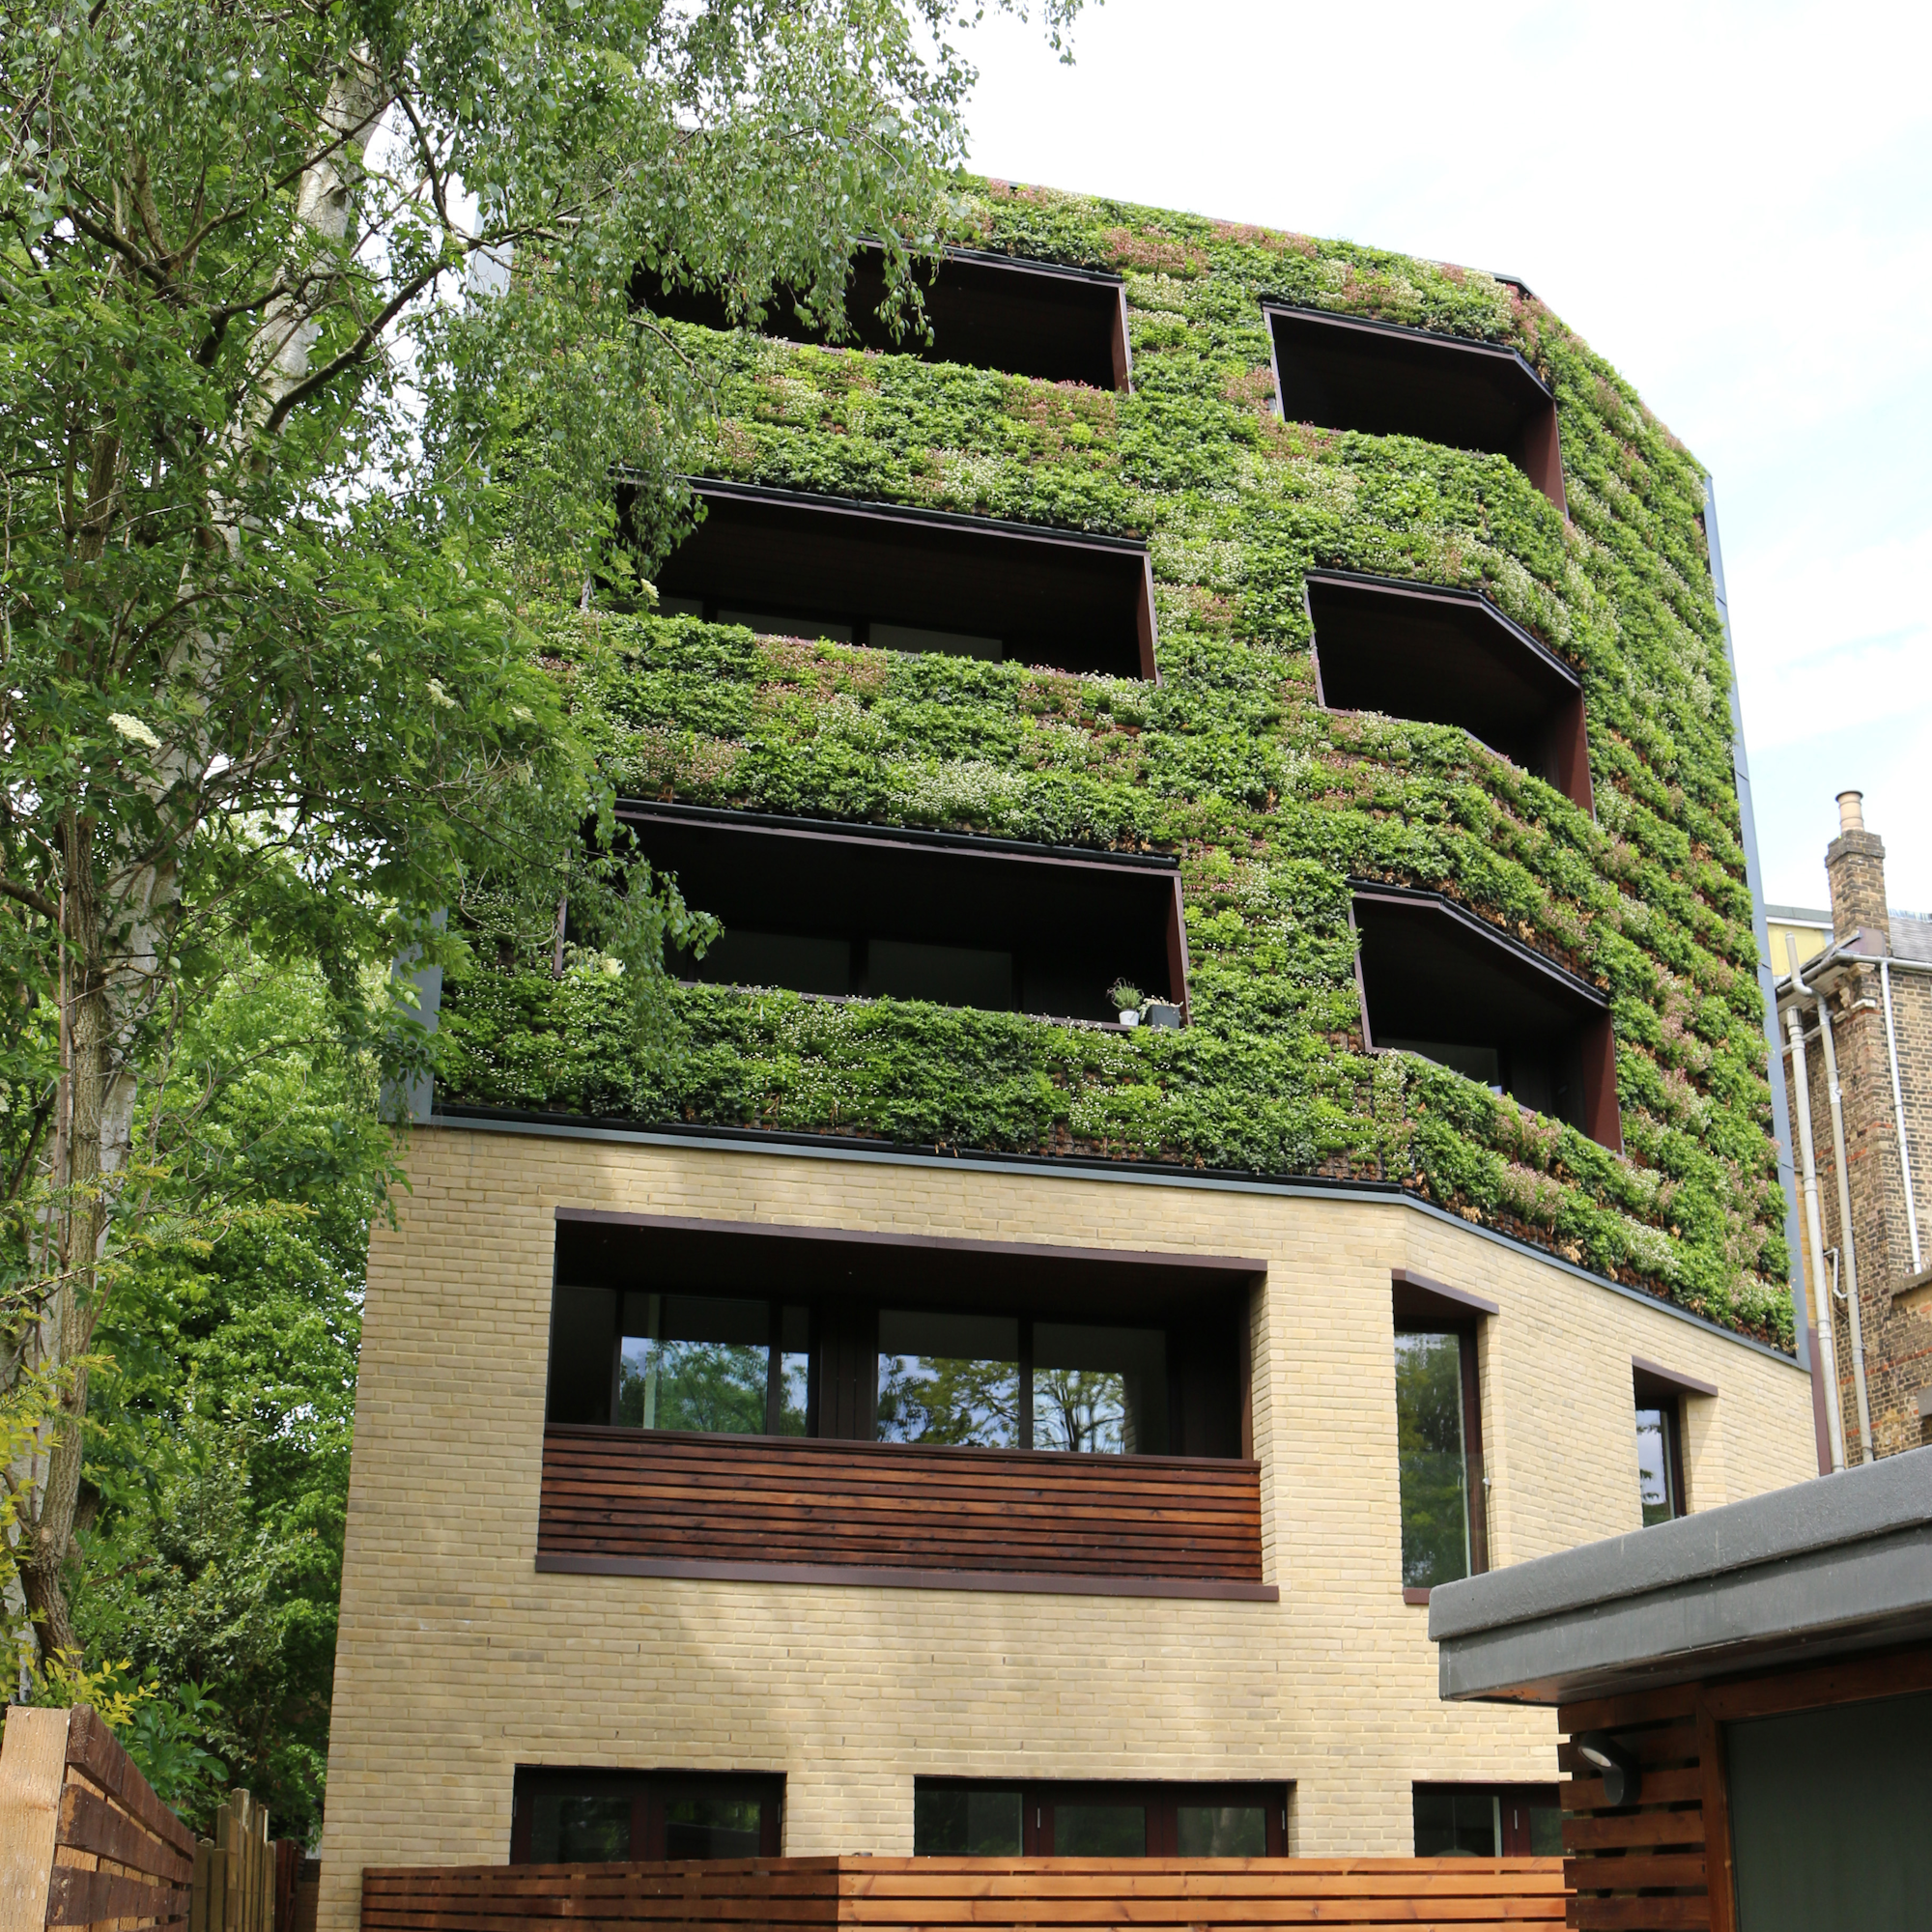 living wall on angled residential multi-storey building